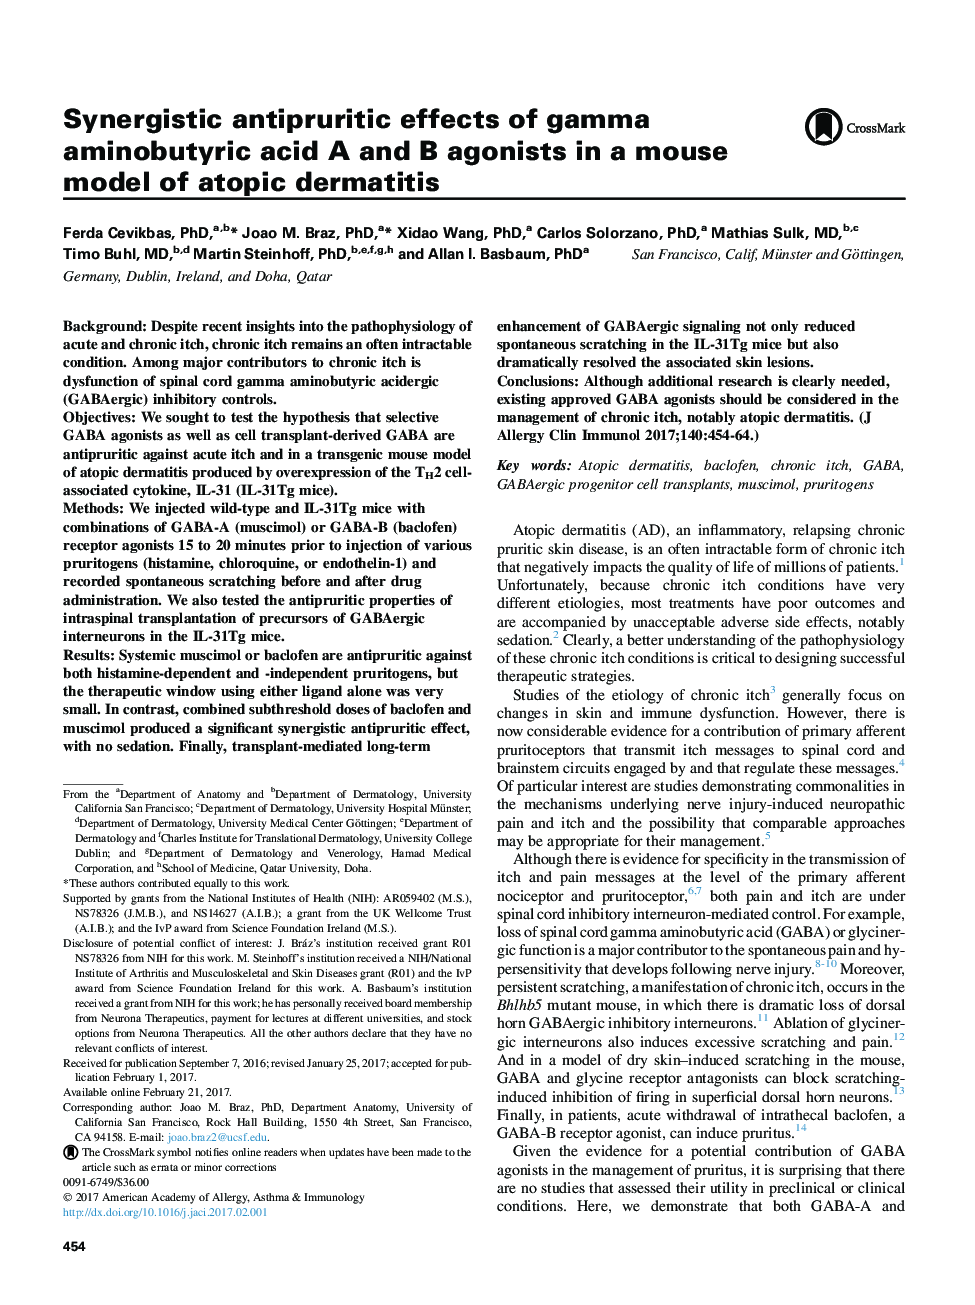 Synergistic antipruritic effects of gamma aminobutyric acid AÂ and B agonists in a mouse model of atopic dermatitis